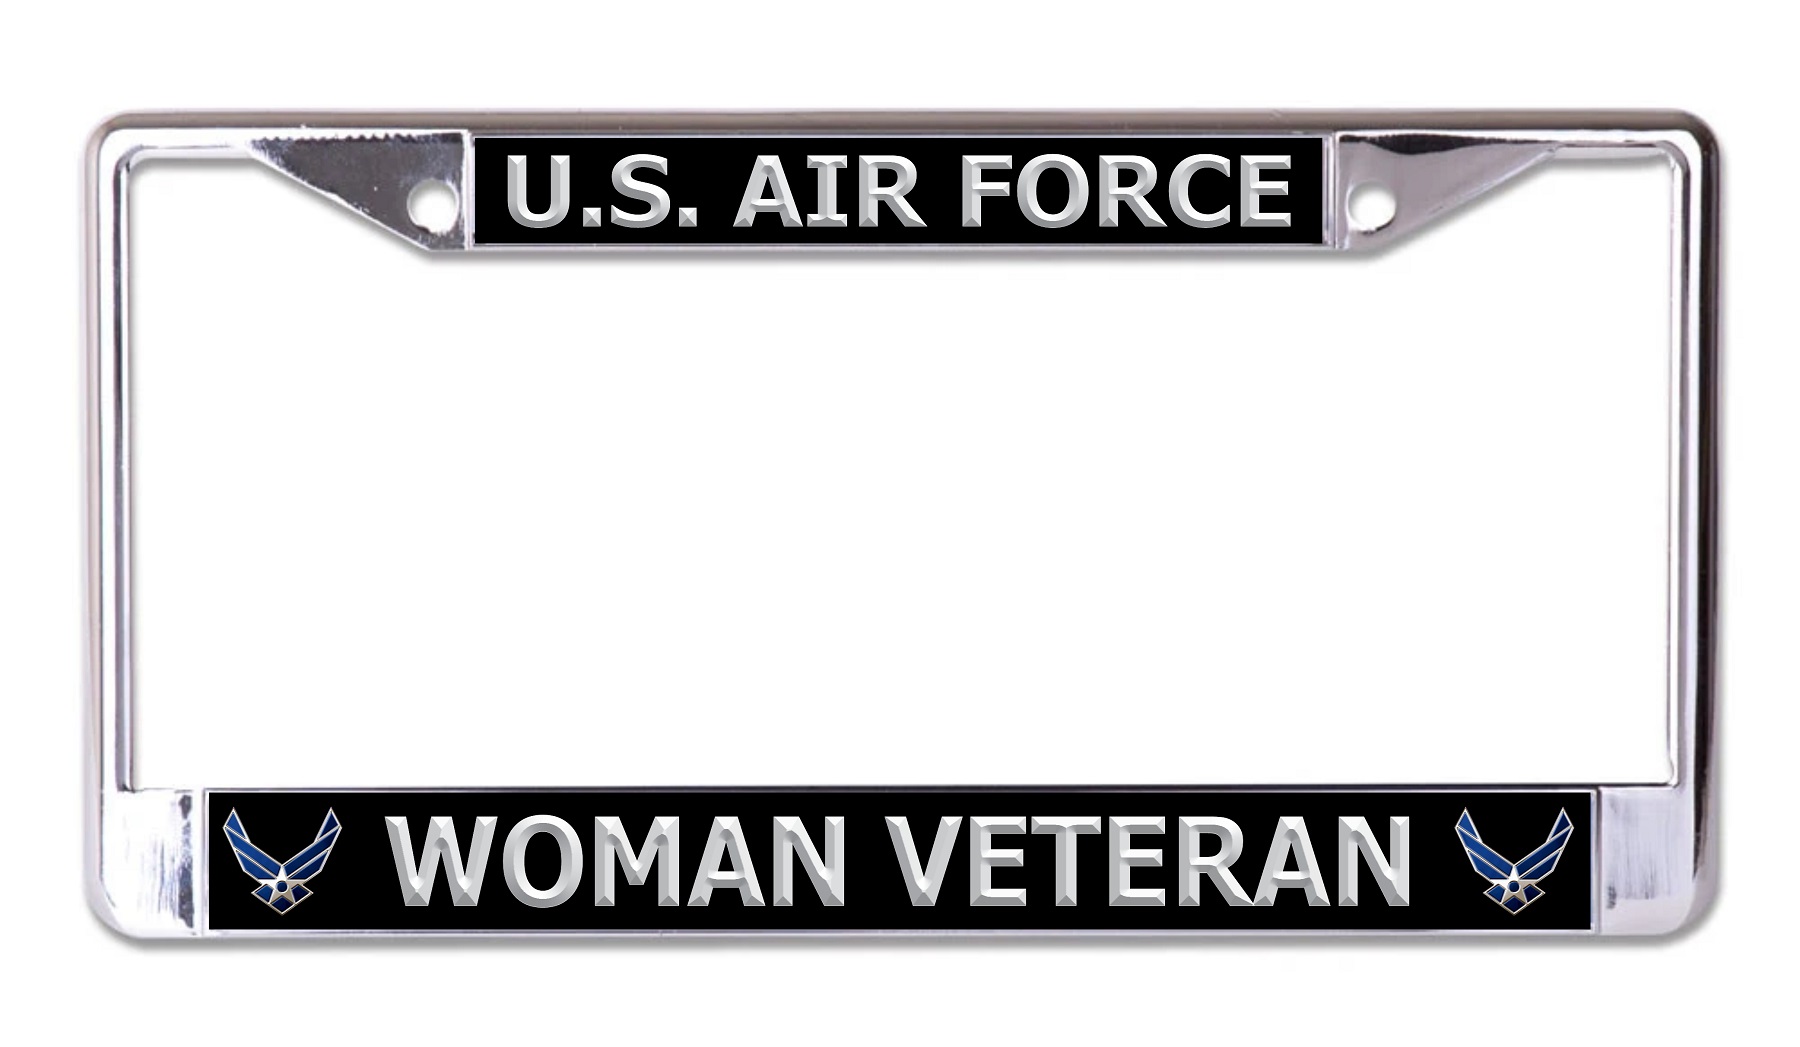 U.S. Air Force Woman Veteran Silver Letters Chrome License Plate FRAME